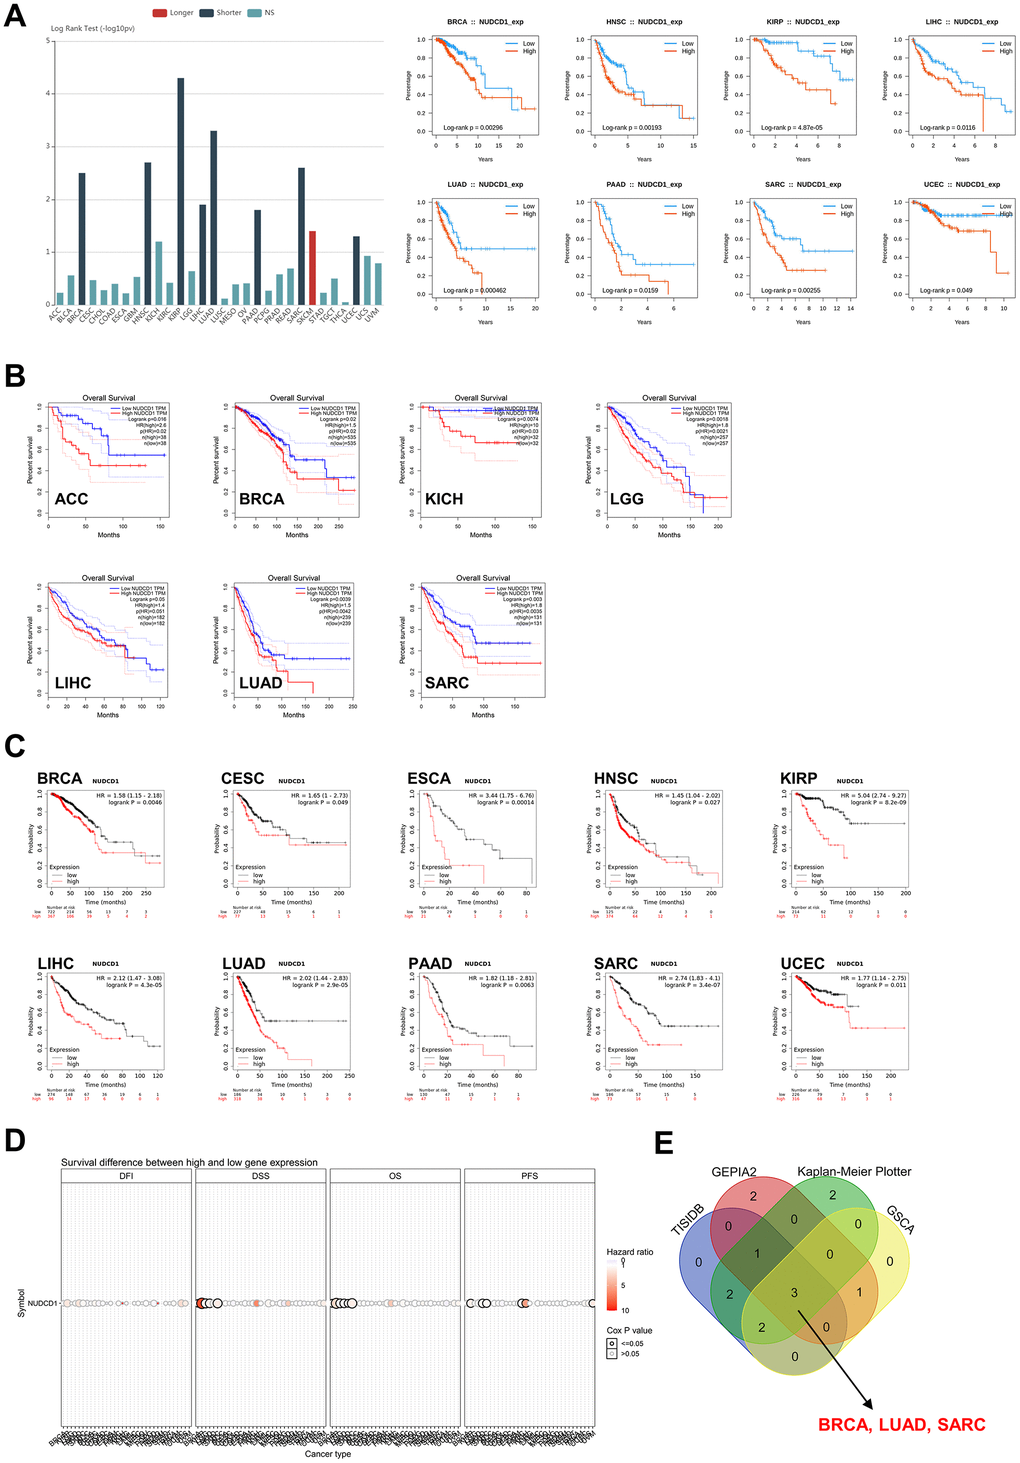 Correlation between NUDCD1 expression and overall survival prognosis of cancers. (A) Associations between NUDCD1 expression and overall survival across human cancers from TISIDB. (B) Associations between NUDCD1 expression and overall survival across specific human cancers from GEPIA2. (C) Effects of NUDCD1 expression on overall survival in multiple cancer types (data from Kaplan-Meier Plotter). (D) Survival differences between high and low NUDCD1 expression groups in multiple cancers (data from GSCA). (E) Wayne diagram summarizing the overall survival data from TISIDB, GEPIA2, Kaplan-Meier Plotter and GSCA.